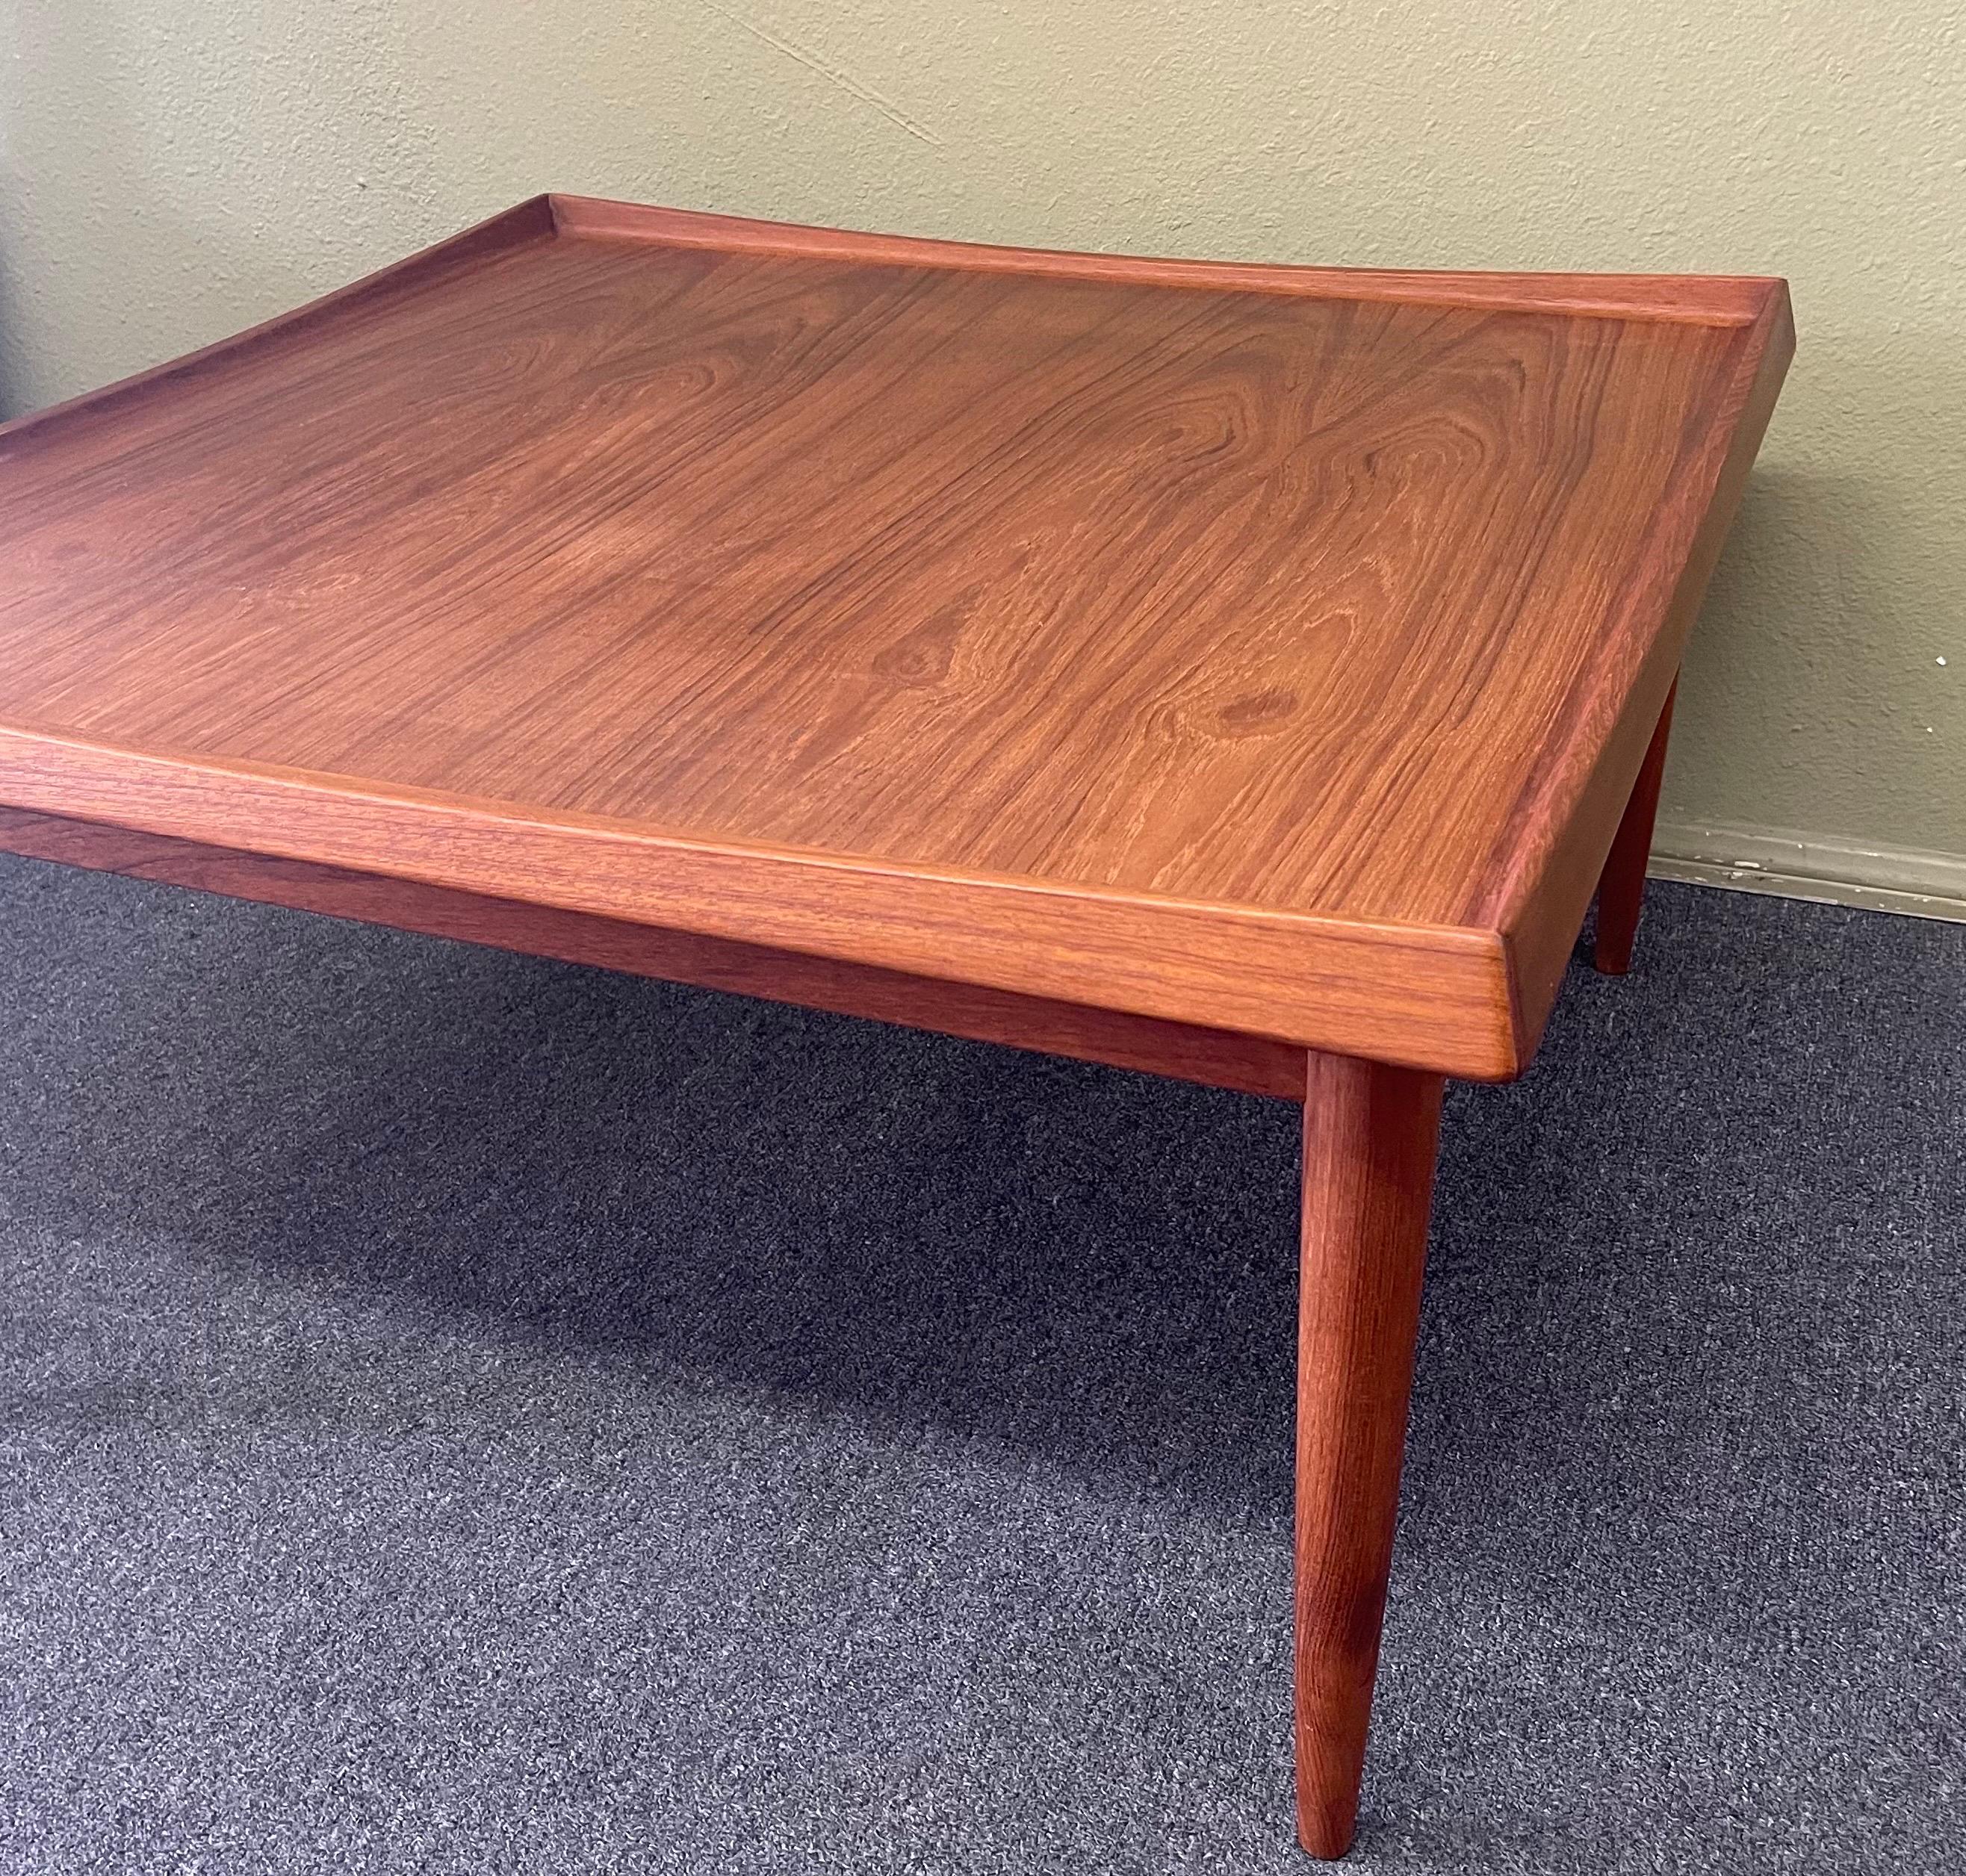 Danish Modern Solid Teak Coffee Table by Moredo For Sale 1